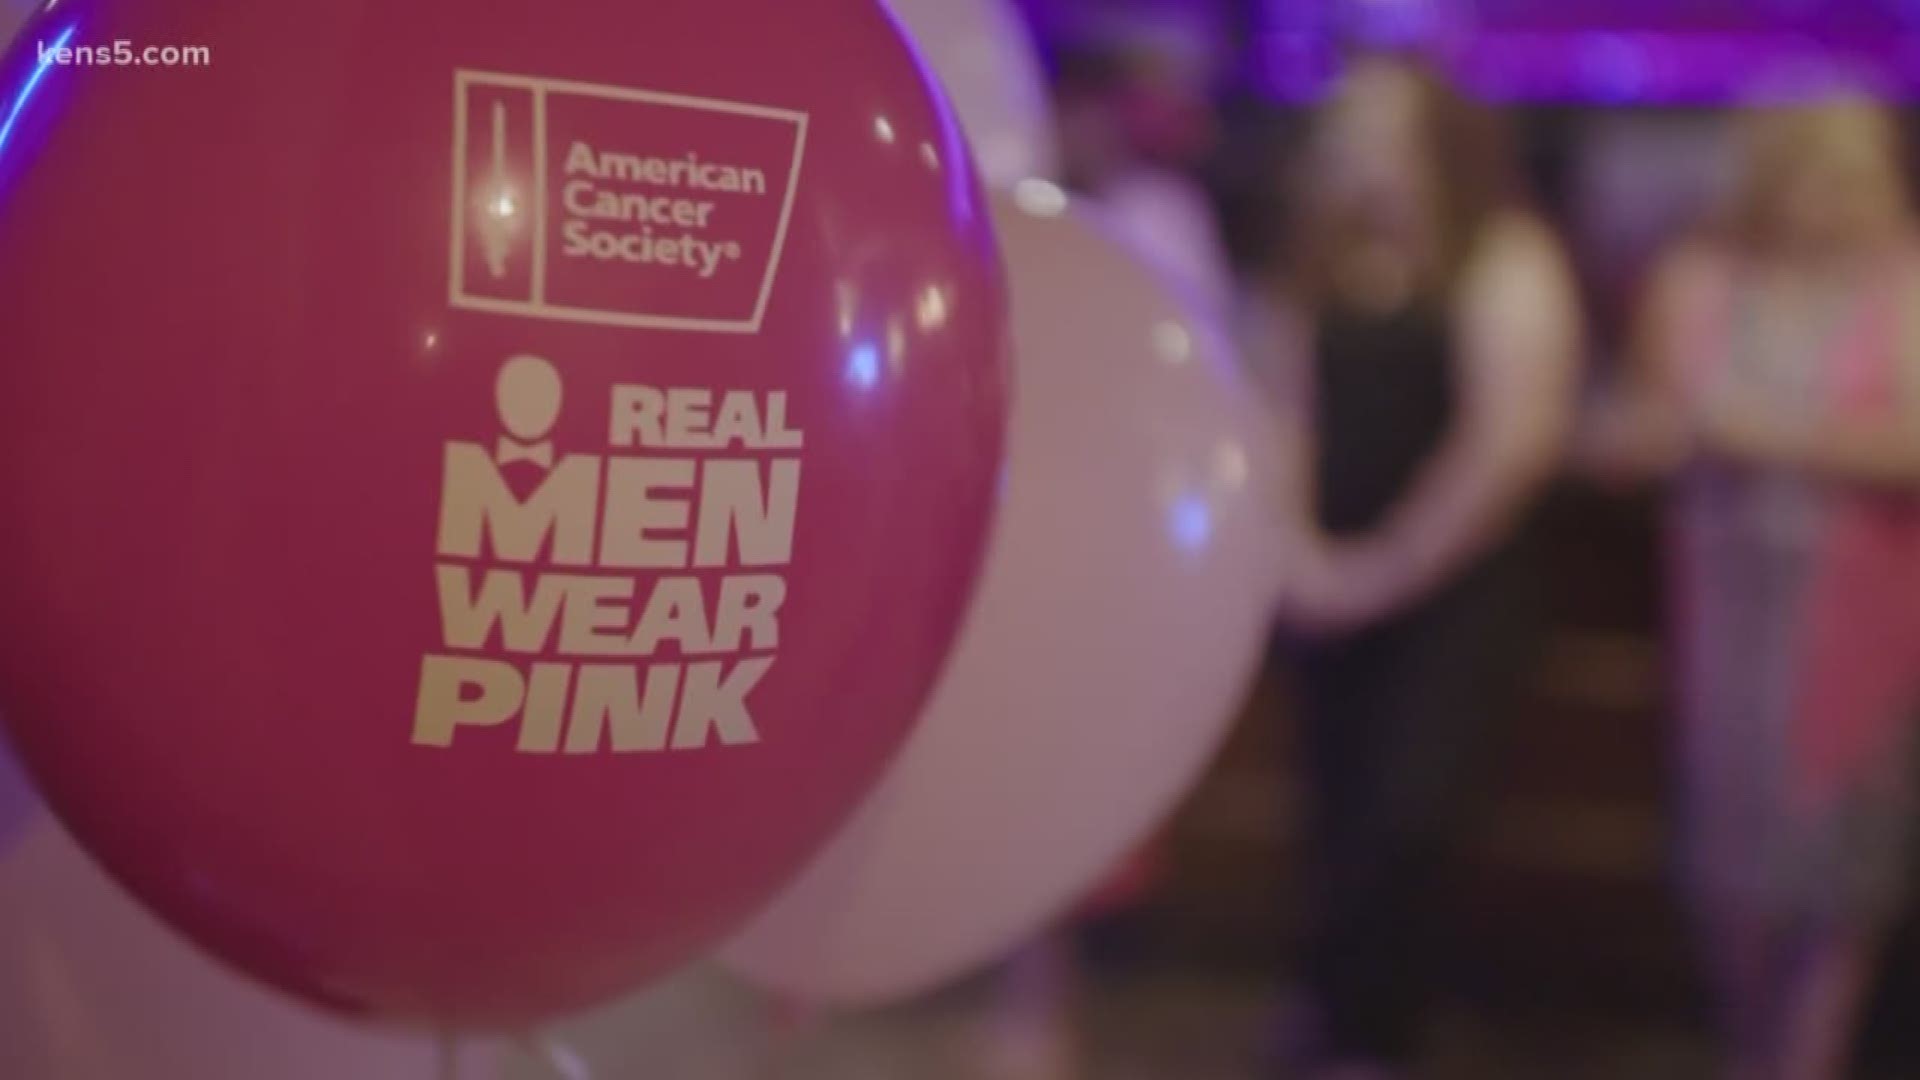 Although less than one percent of men experience breast cancer, dozens are stepping up fight the disease by wearing the color pink.